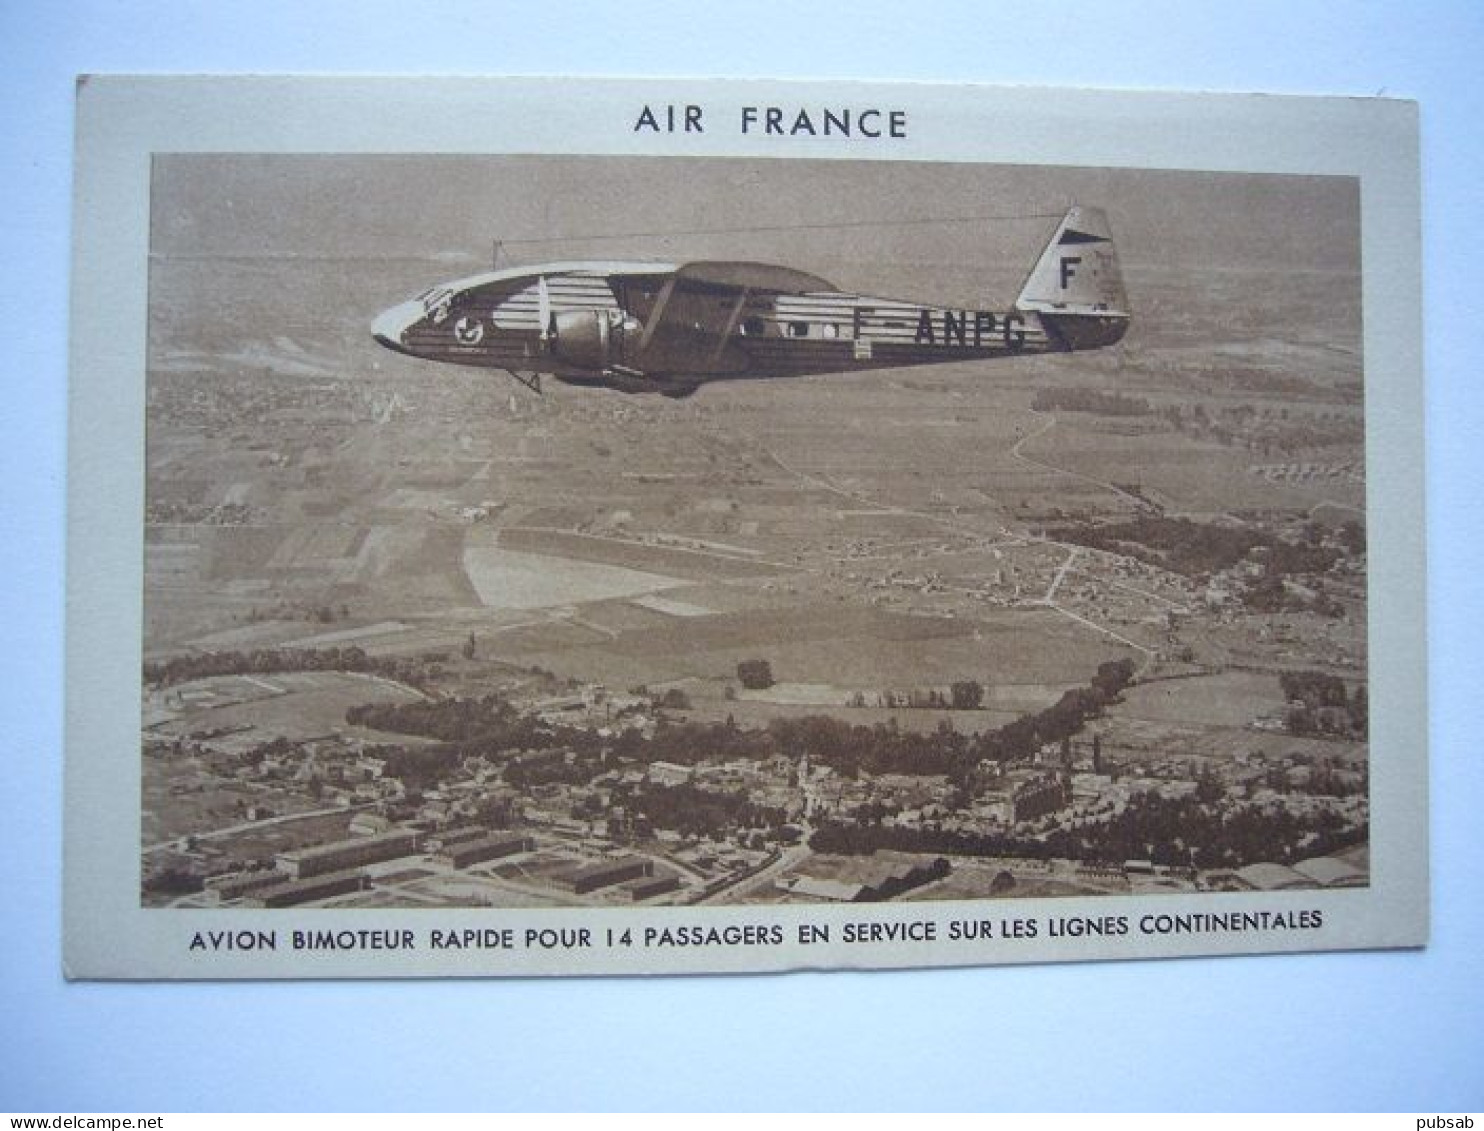 Avion / Airplane / AIR FRANCE / Potez 650 / Airline Issue - 1919-1938: Between Wars